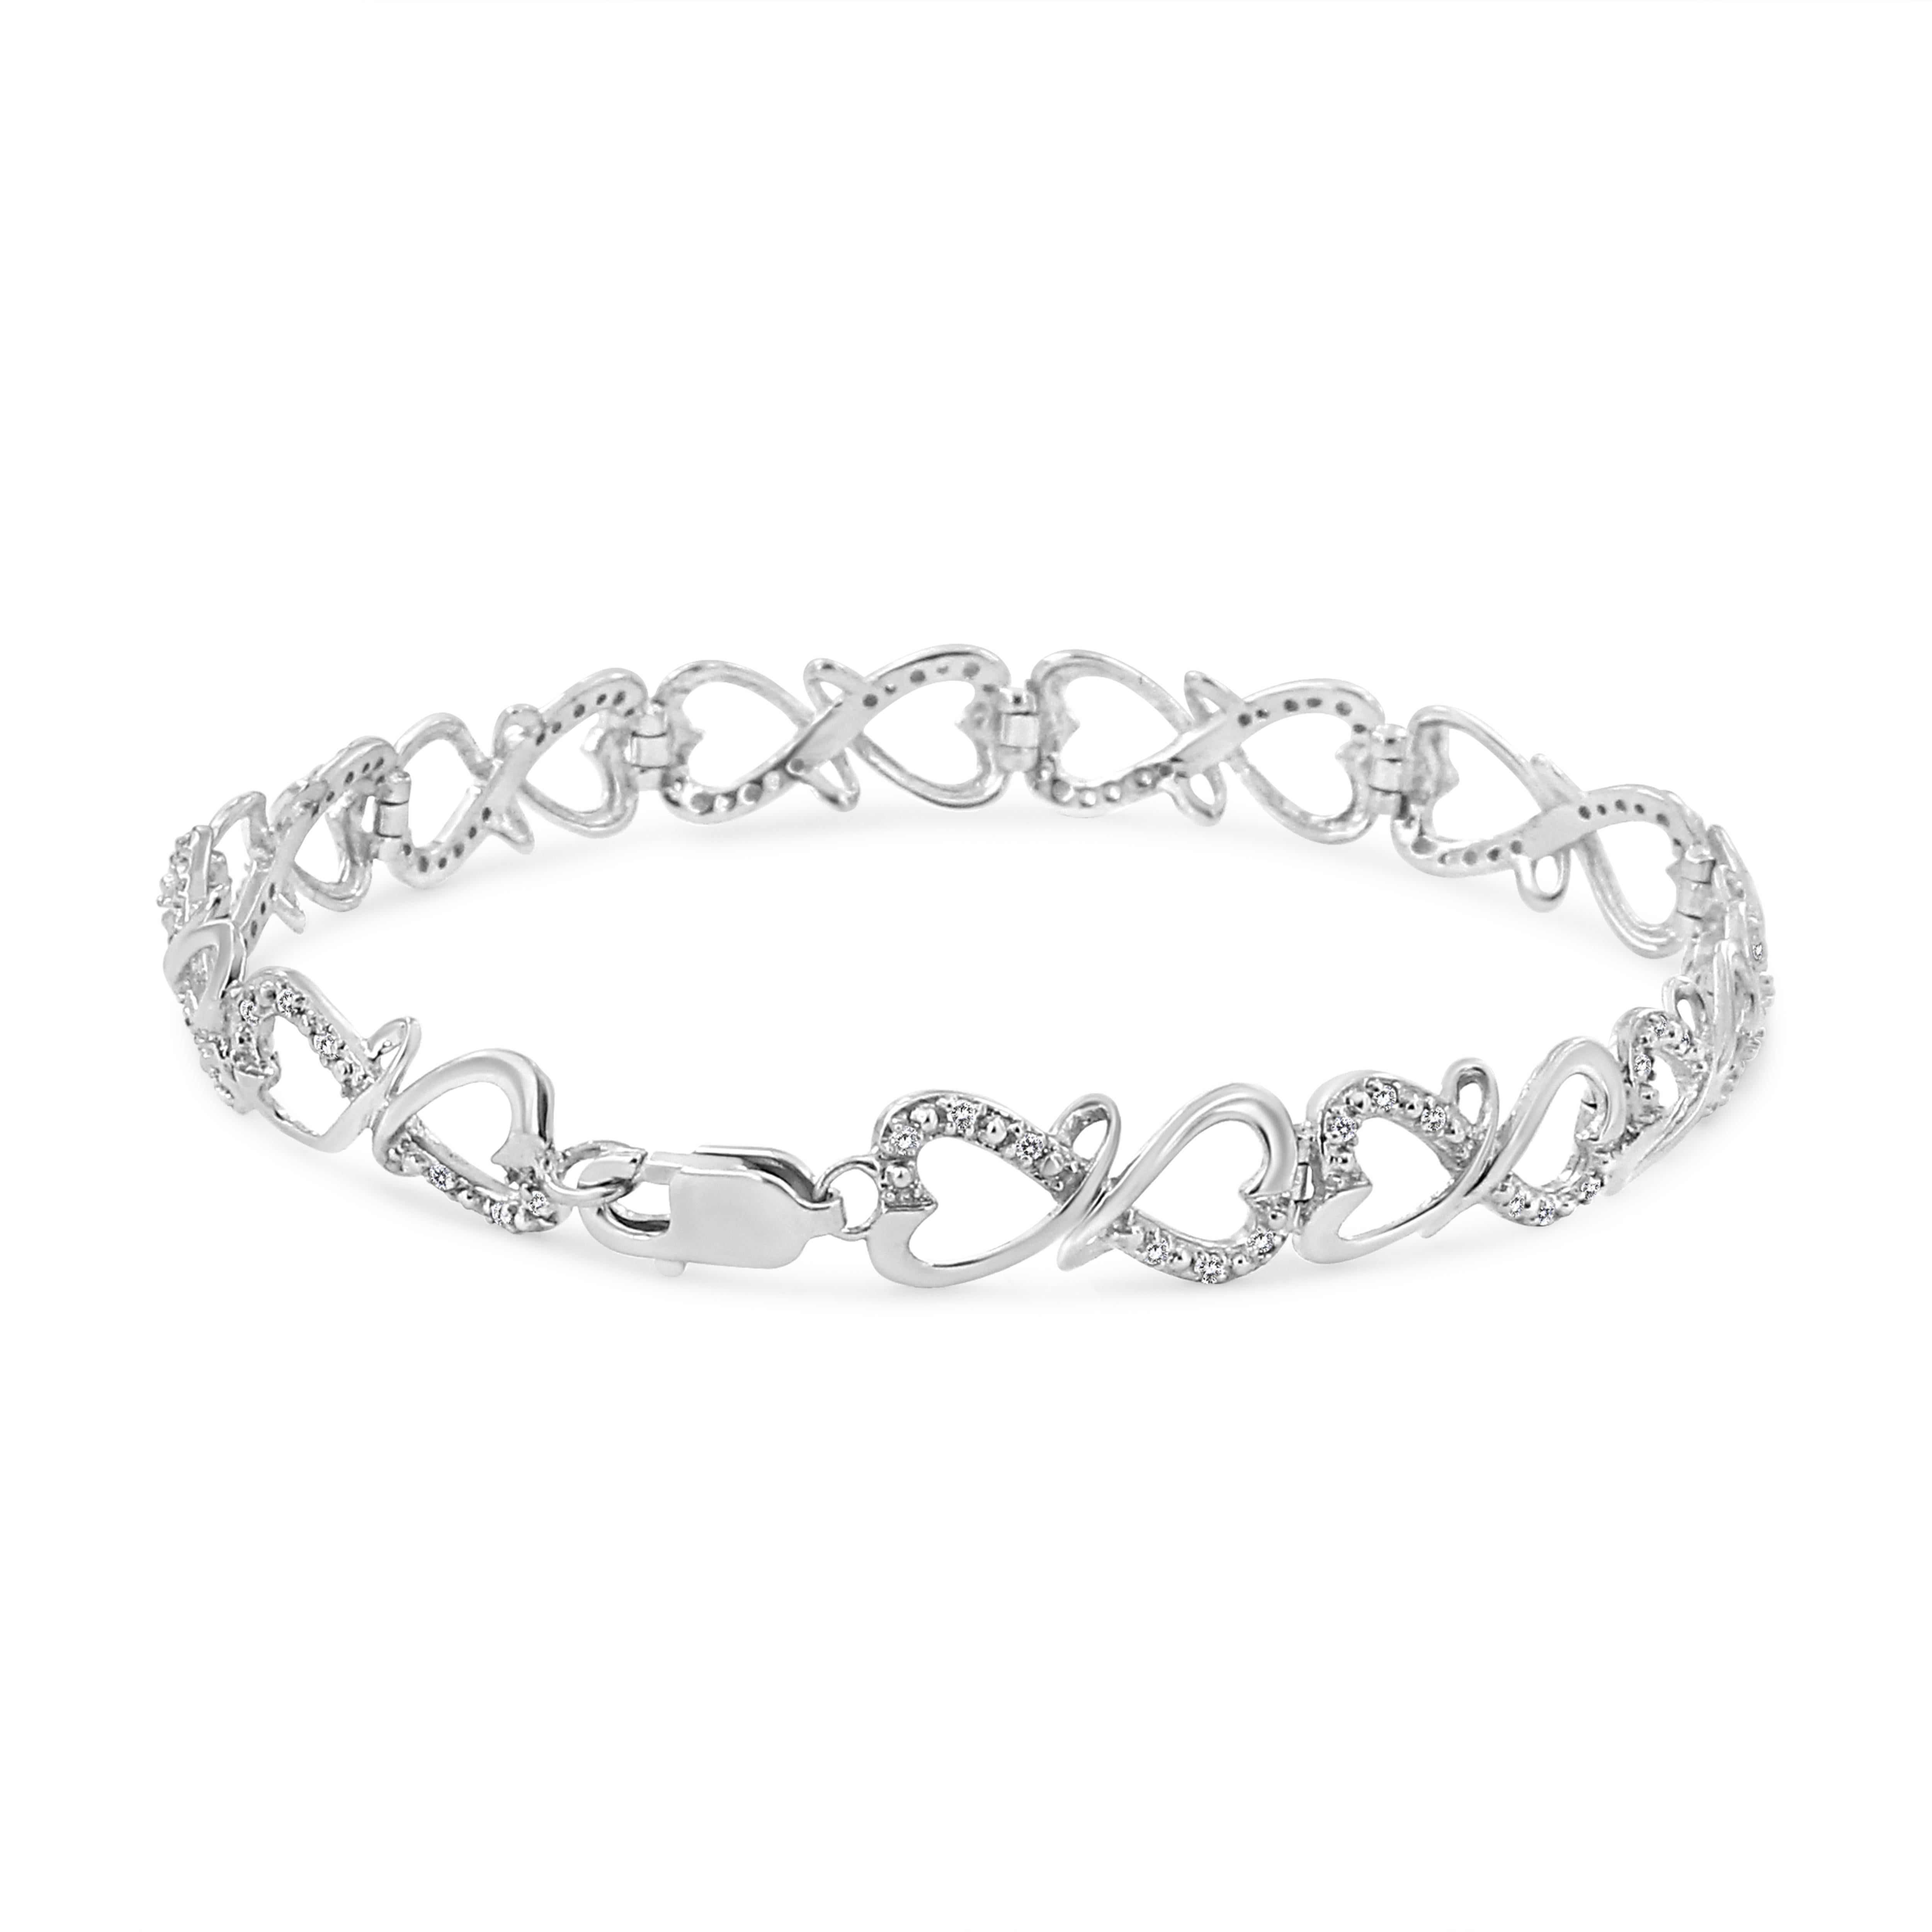 Modern and chic, this beautiful silver bracelet is elegantly crafted with a double heart link design. The metal is genuine .925 sterling silver, ensuring it will stay tarnish free for years to come. The double heart links are intricately embellished